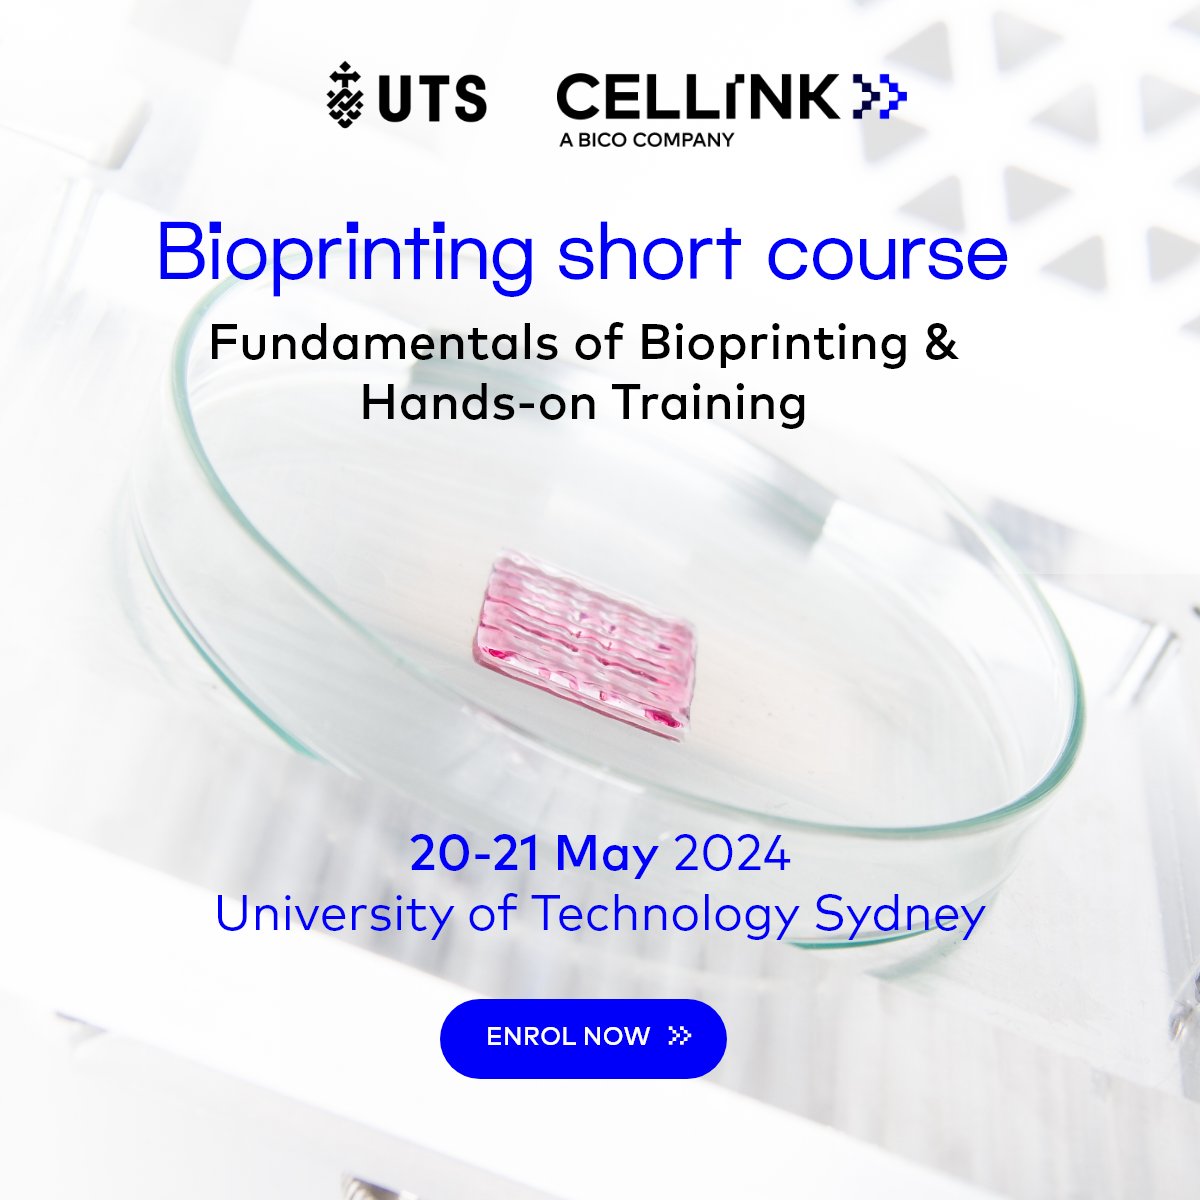 Get access to all the skills needed to become a bioprinting expert from @carmine_3Dheart at the University of Technology Sydney. This hands-on bioprinting course promises to give users a unique experience in getting up to speed with bioprinting bit.ly/49wgKWw